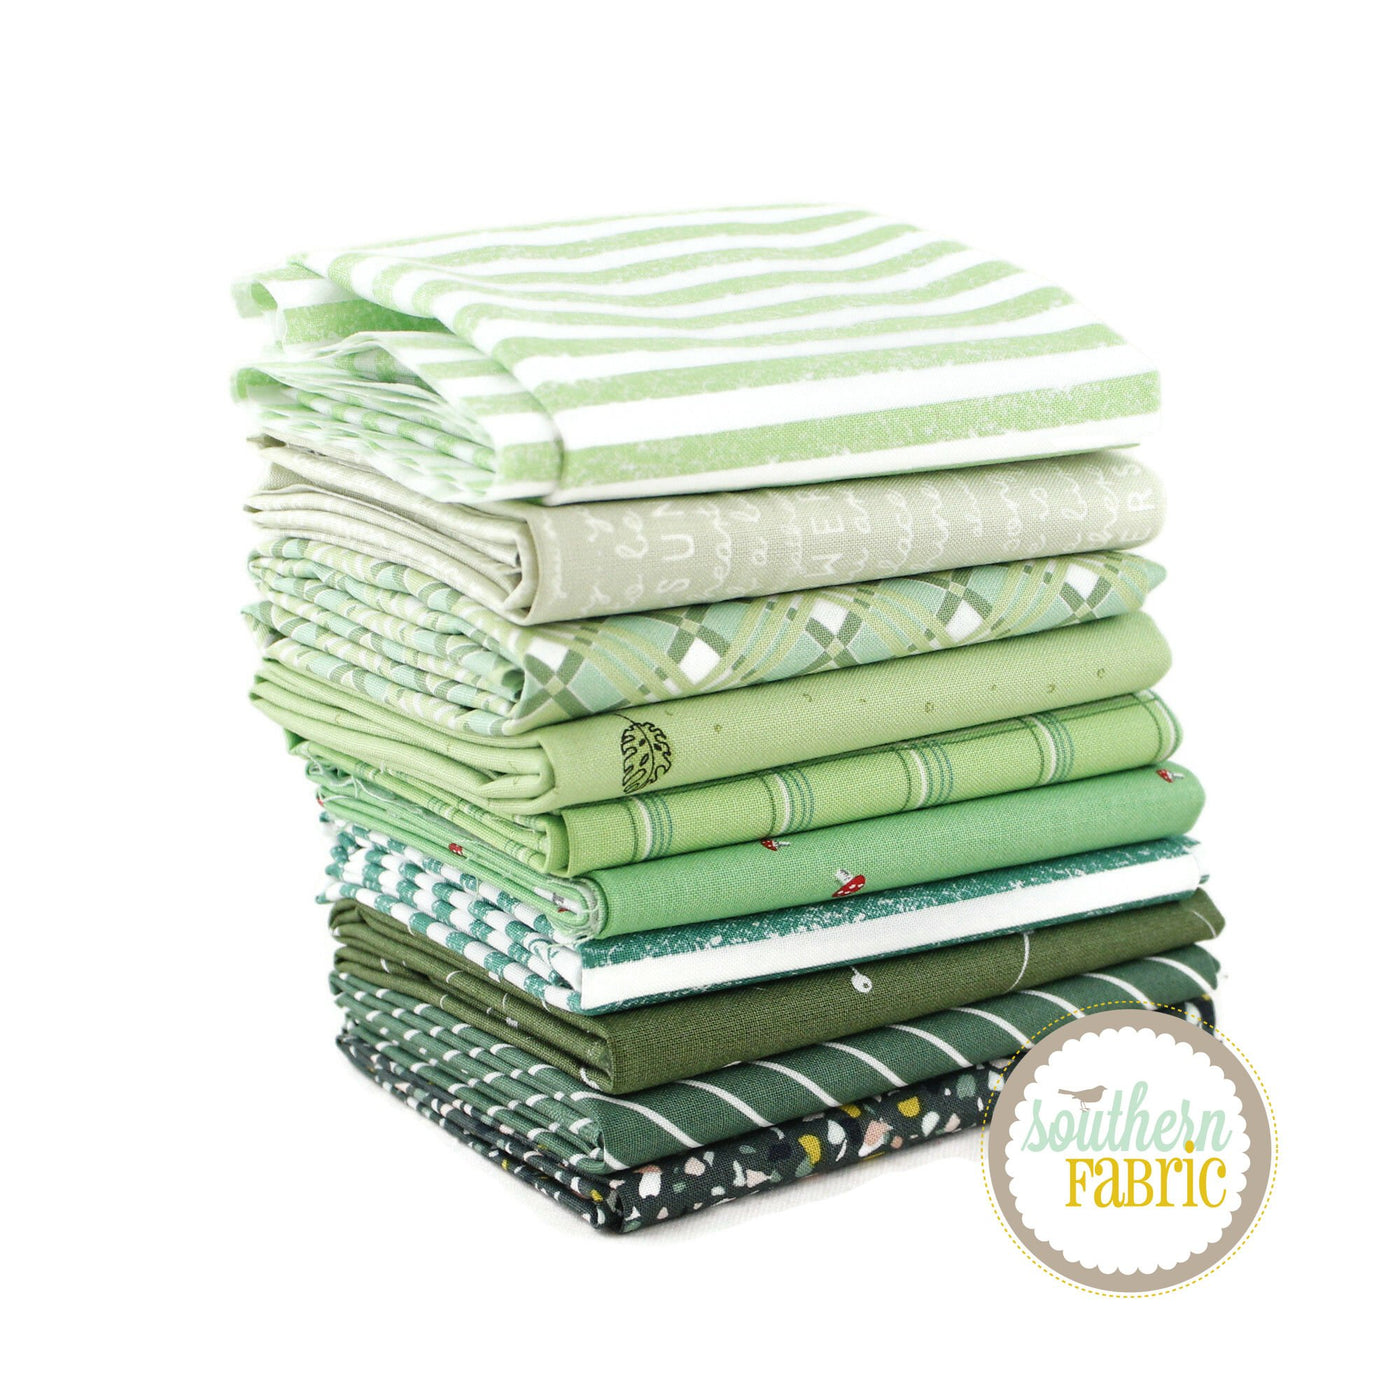 Green Half Yard Bundle (10 pcs) by Mixed Designers for Southern Fabric